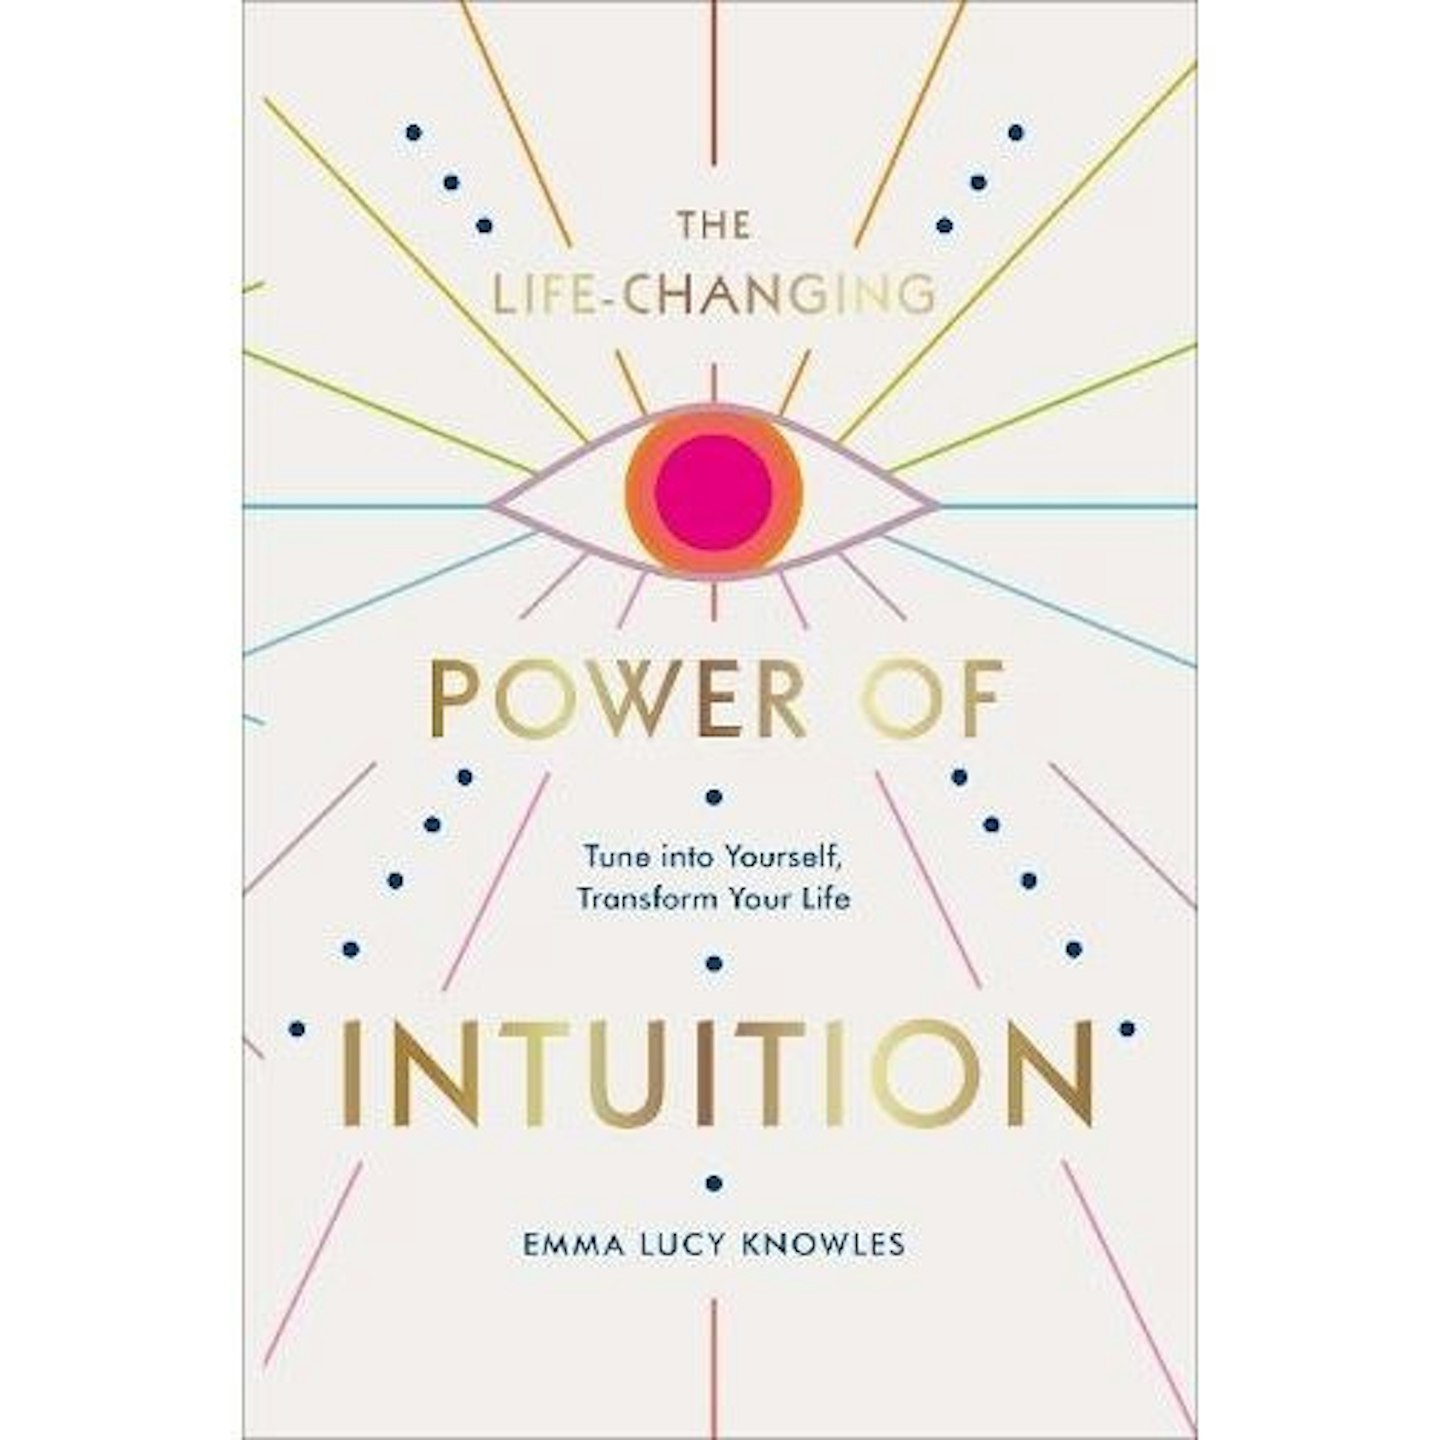 best wellbeing books - The Life-Changing Power of Intuition: Tune into Yourself, Transform Your Life